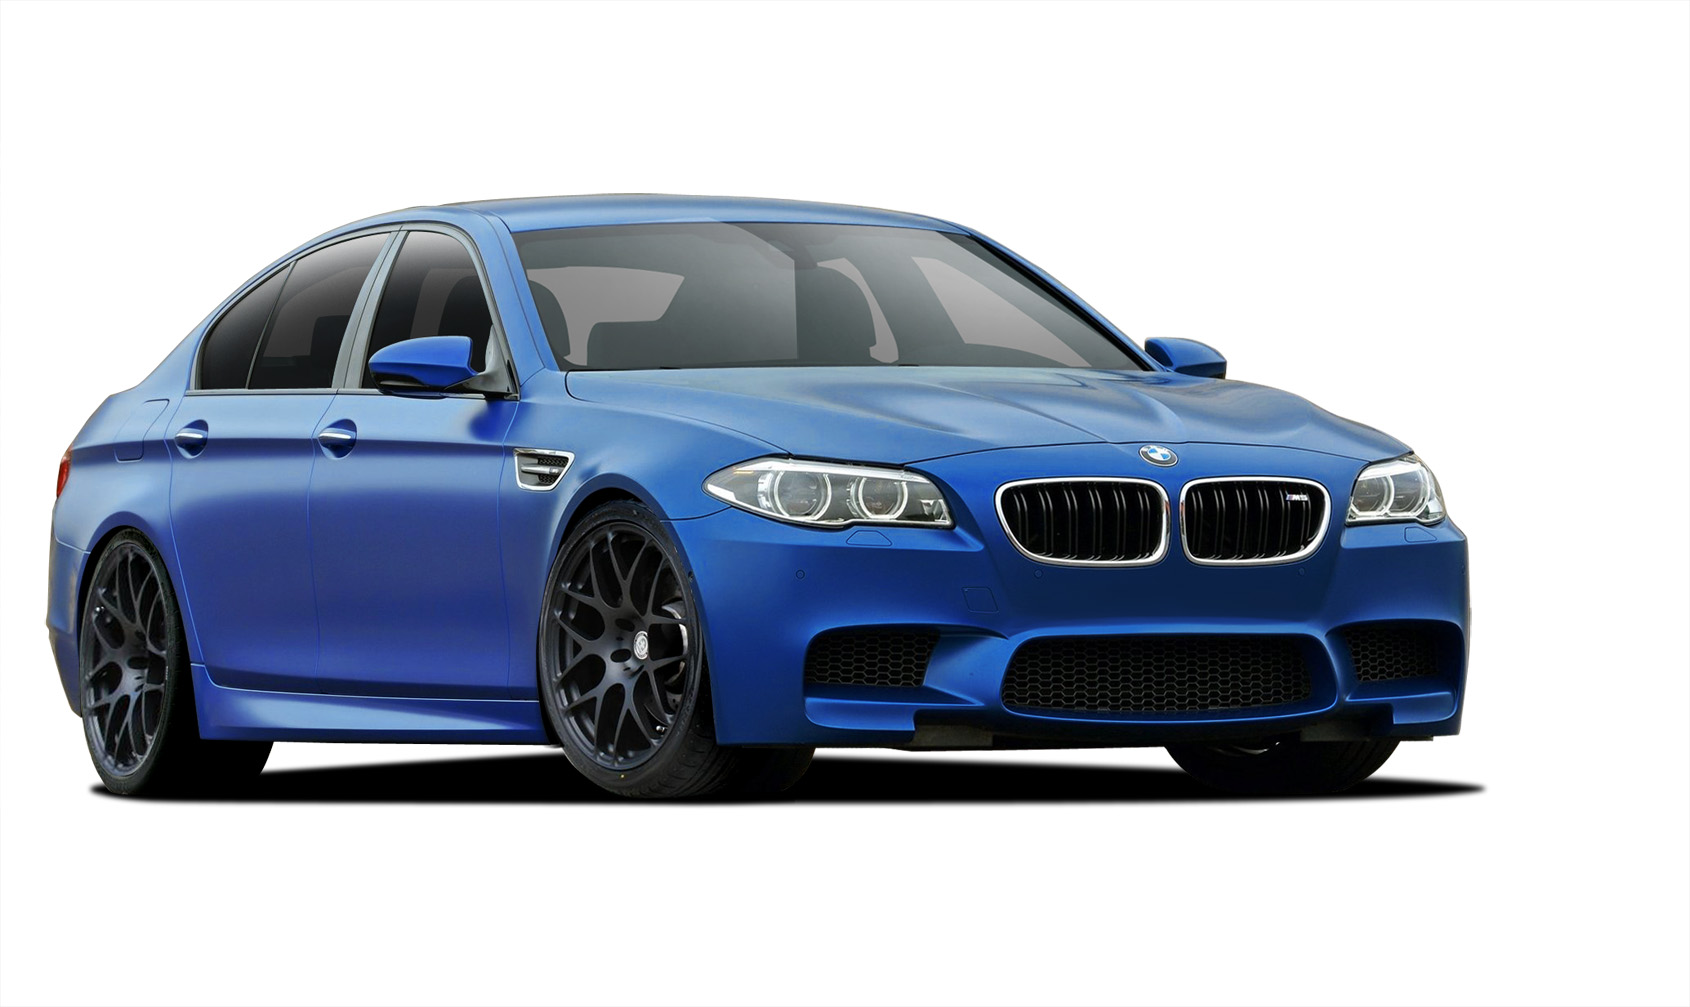 2016 BMW 5 Series 4DR - Polypropylene Body Kit Bodykit - BMW 5 Series F10 Vaero M5 Look Conversion Kit ( with PDC , with Washer , with Camera ) - 6 Pi